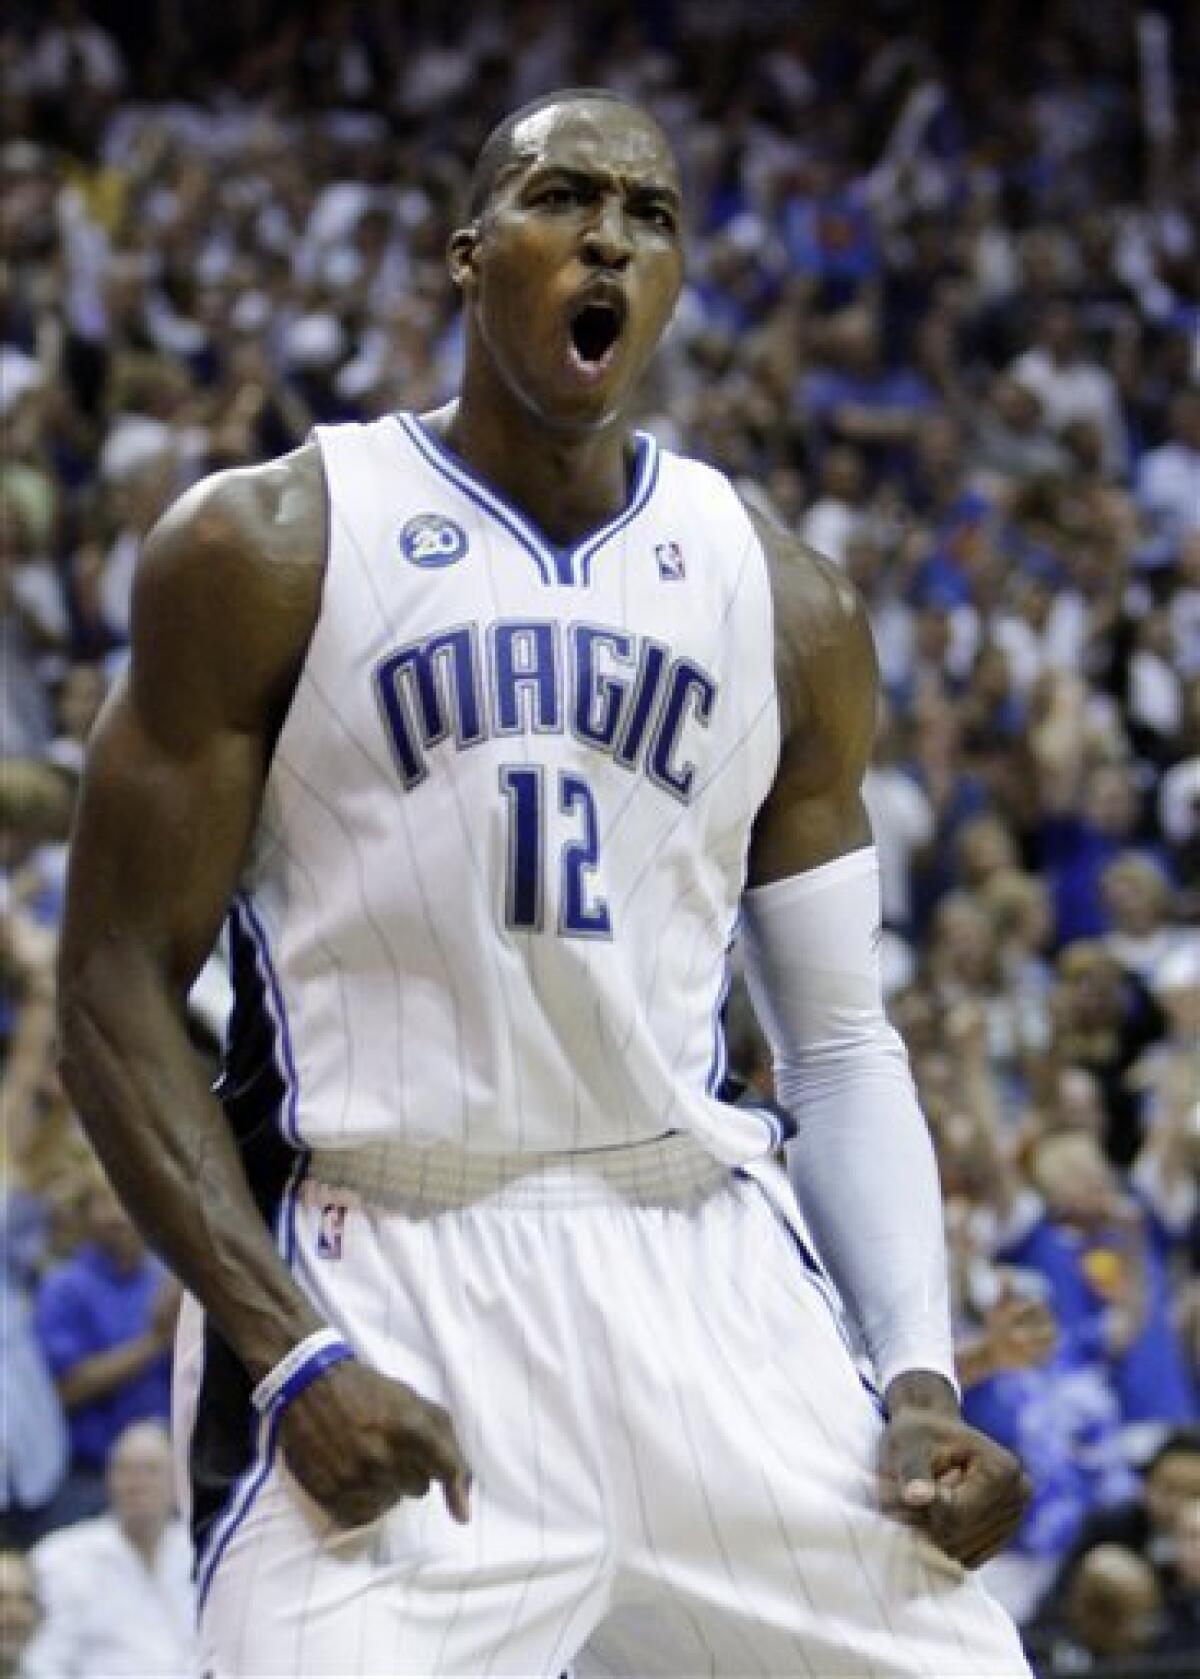 Orlando Magic's Dwight Howard reacts after a fourth quarter dunk against the Cleveland Cavaliers in Game 6 of the NBA Eastern Conference basketball finals Saturday, May 30, 2009, in Orlando, Fla. (AP Photo/John Raoux)